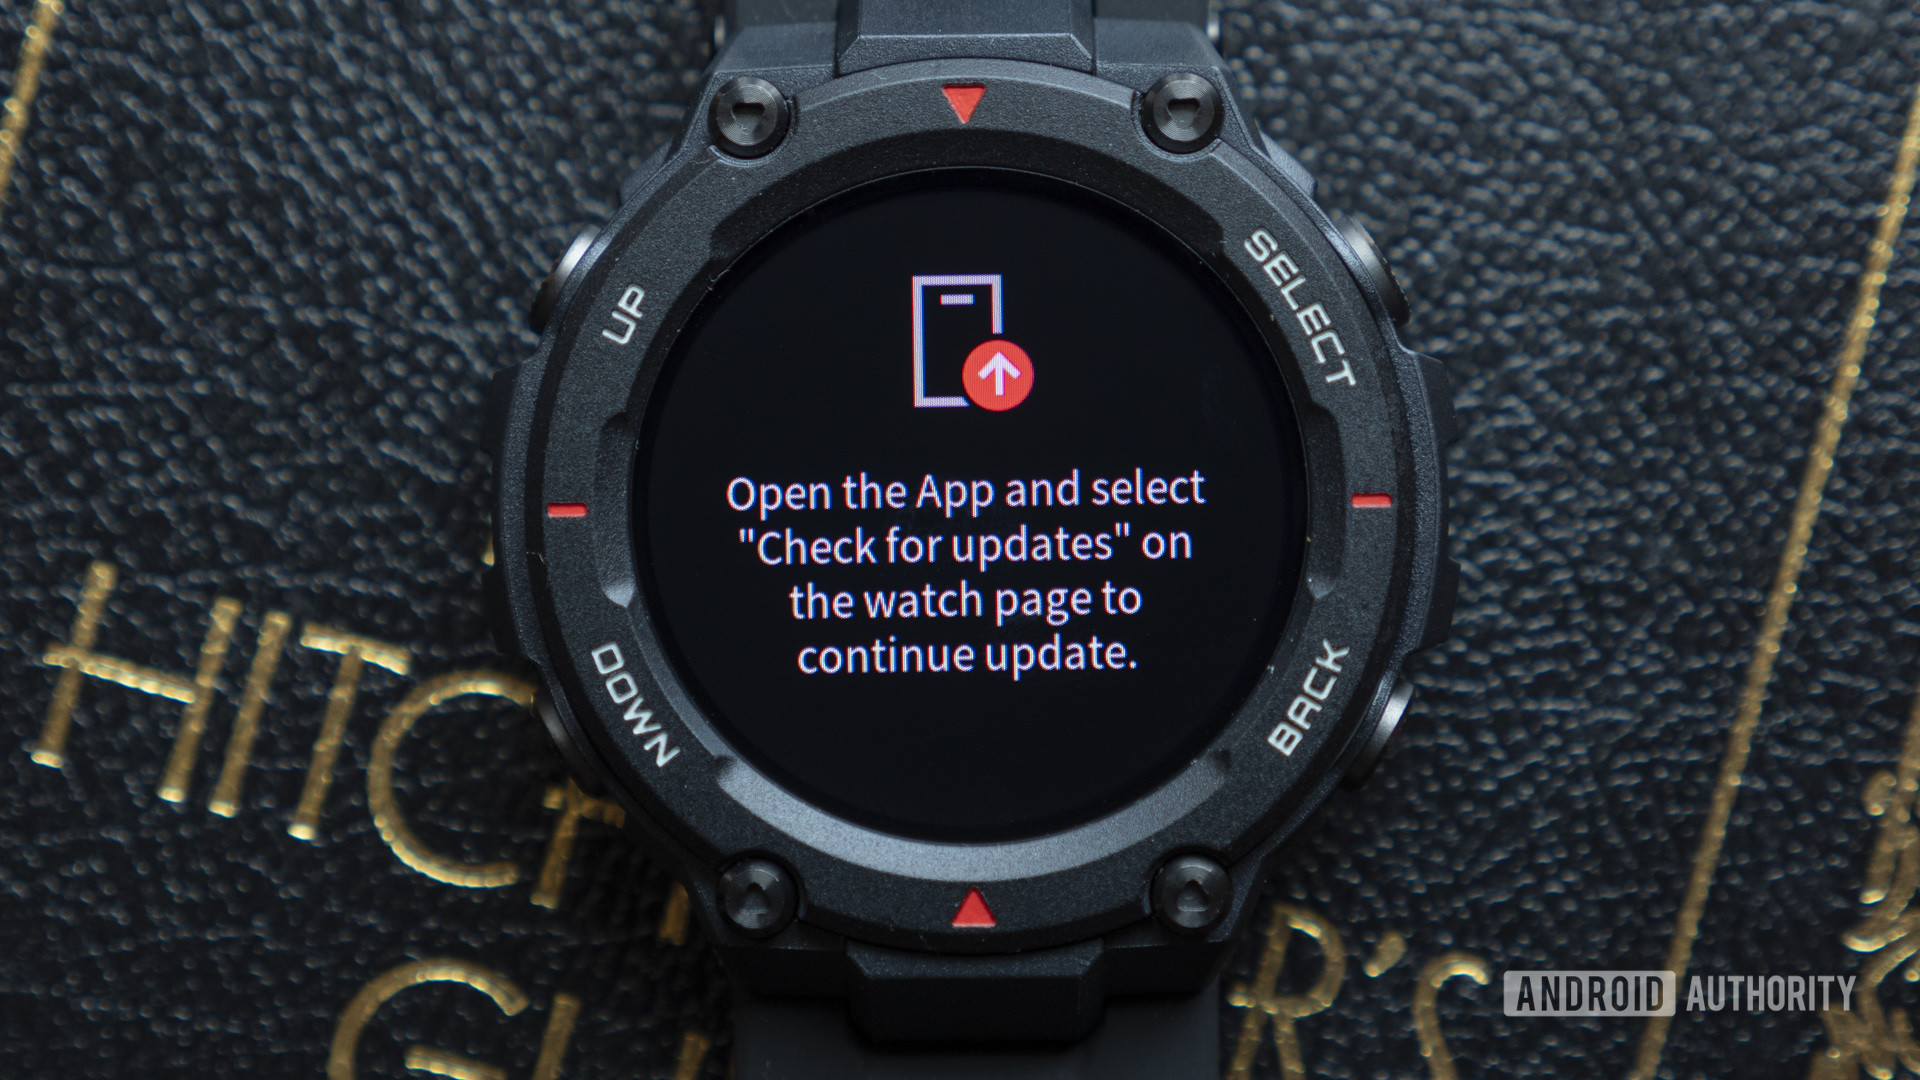 huami amazfit t rex smartwatch open the app and select check for updates display message